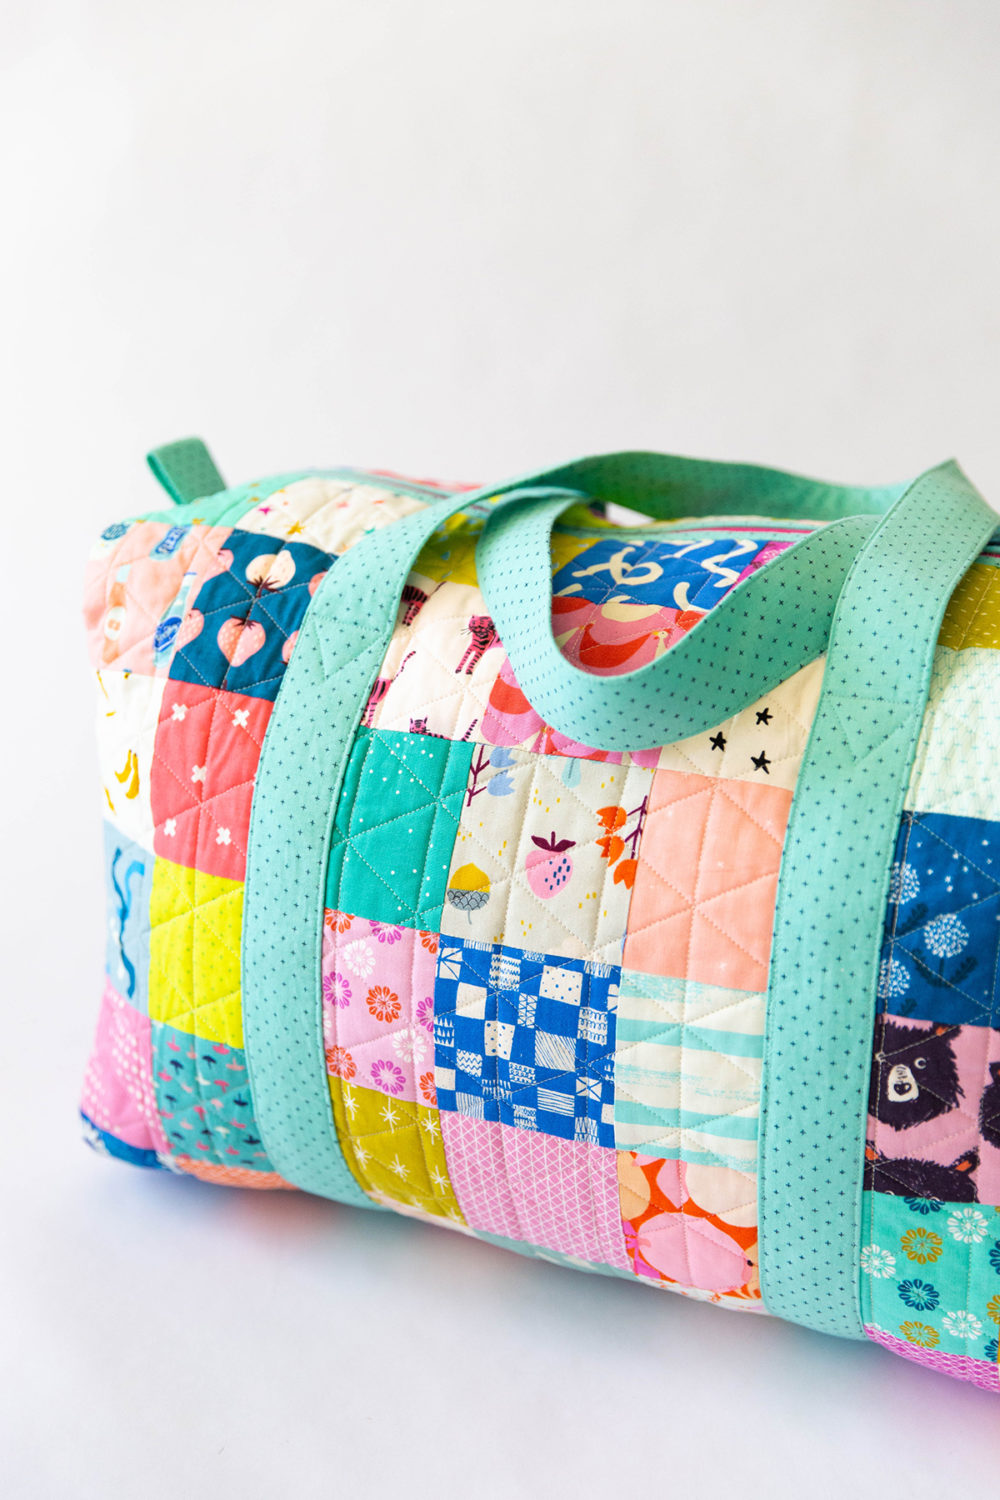 25 Free Purse and Bag Patterns to Sew